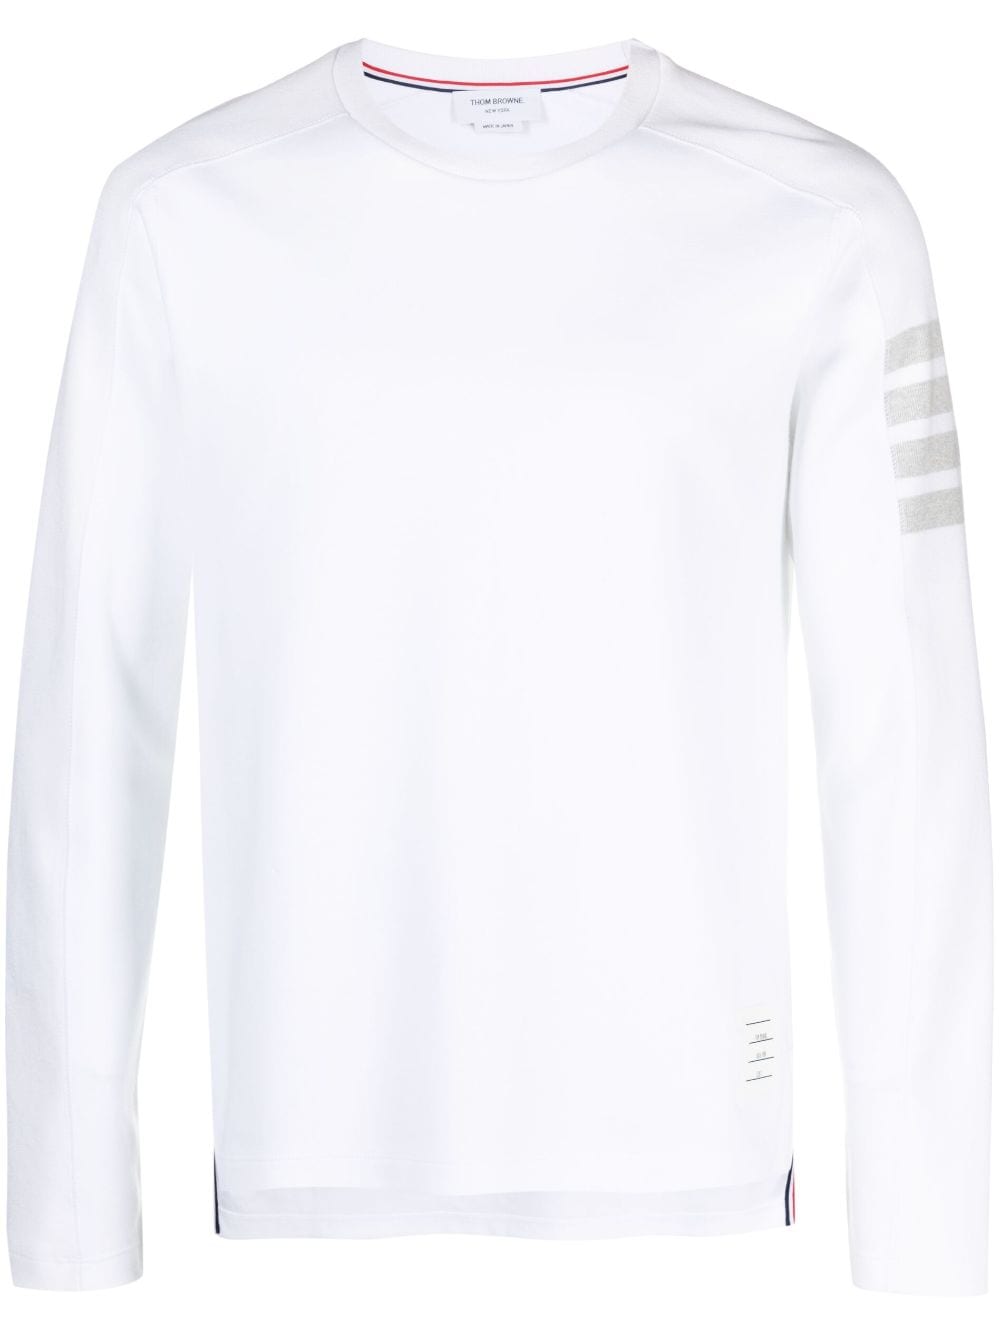 Off-White 4-Barstriped T-Shirt for Men - Iconic Design by Thom Browne